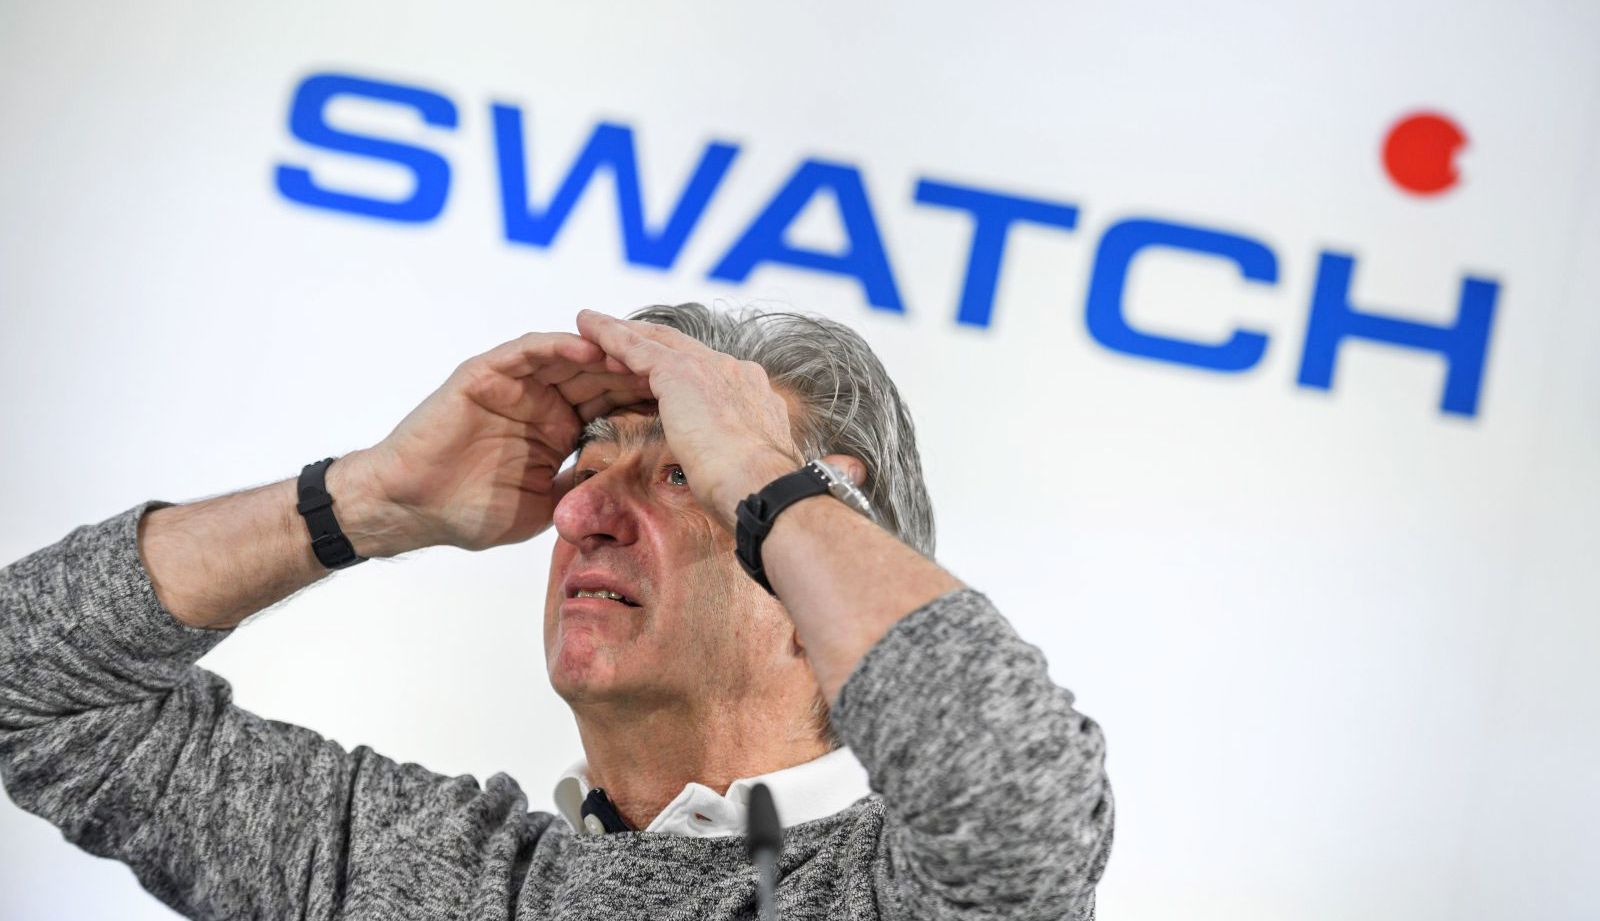 Swatch is developing its own operating system for smart watches